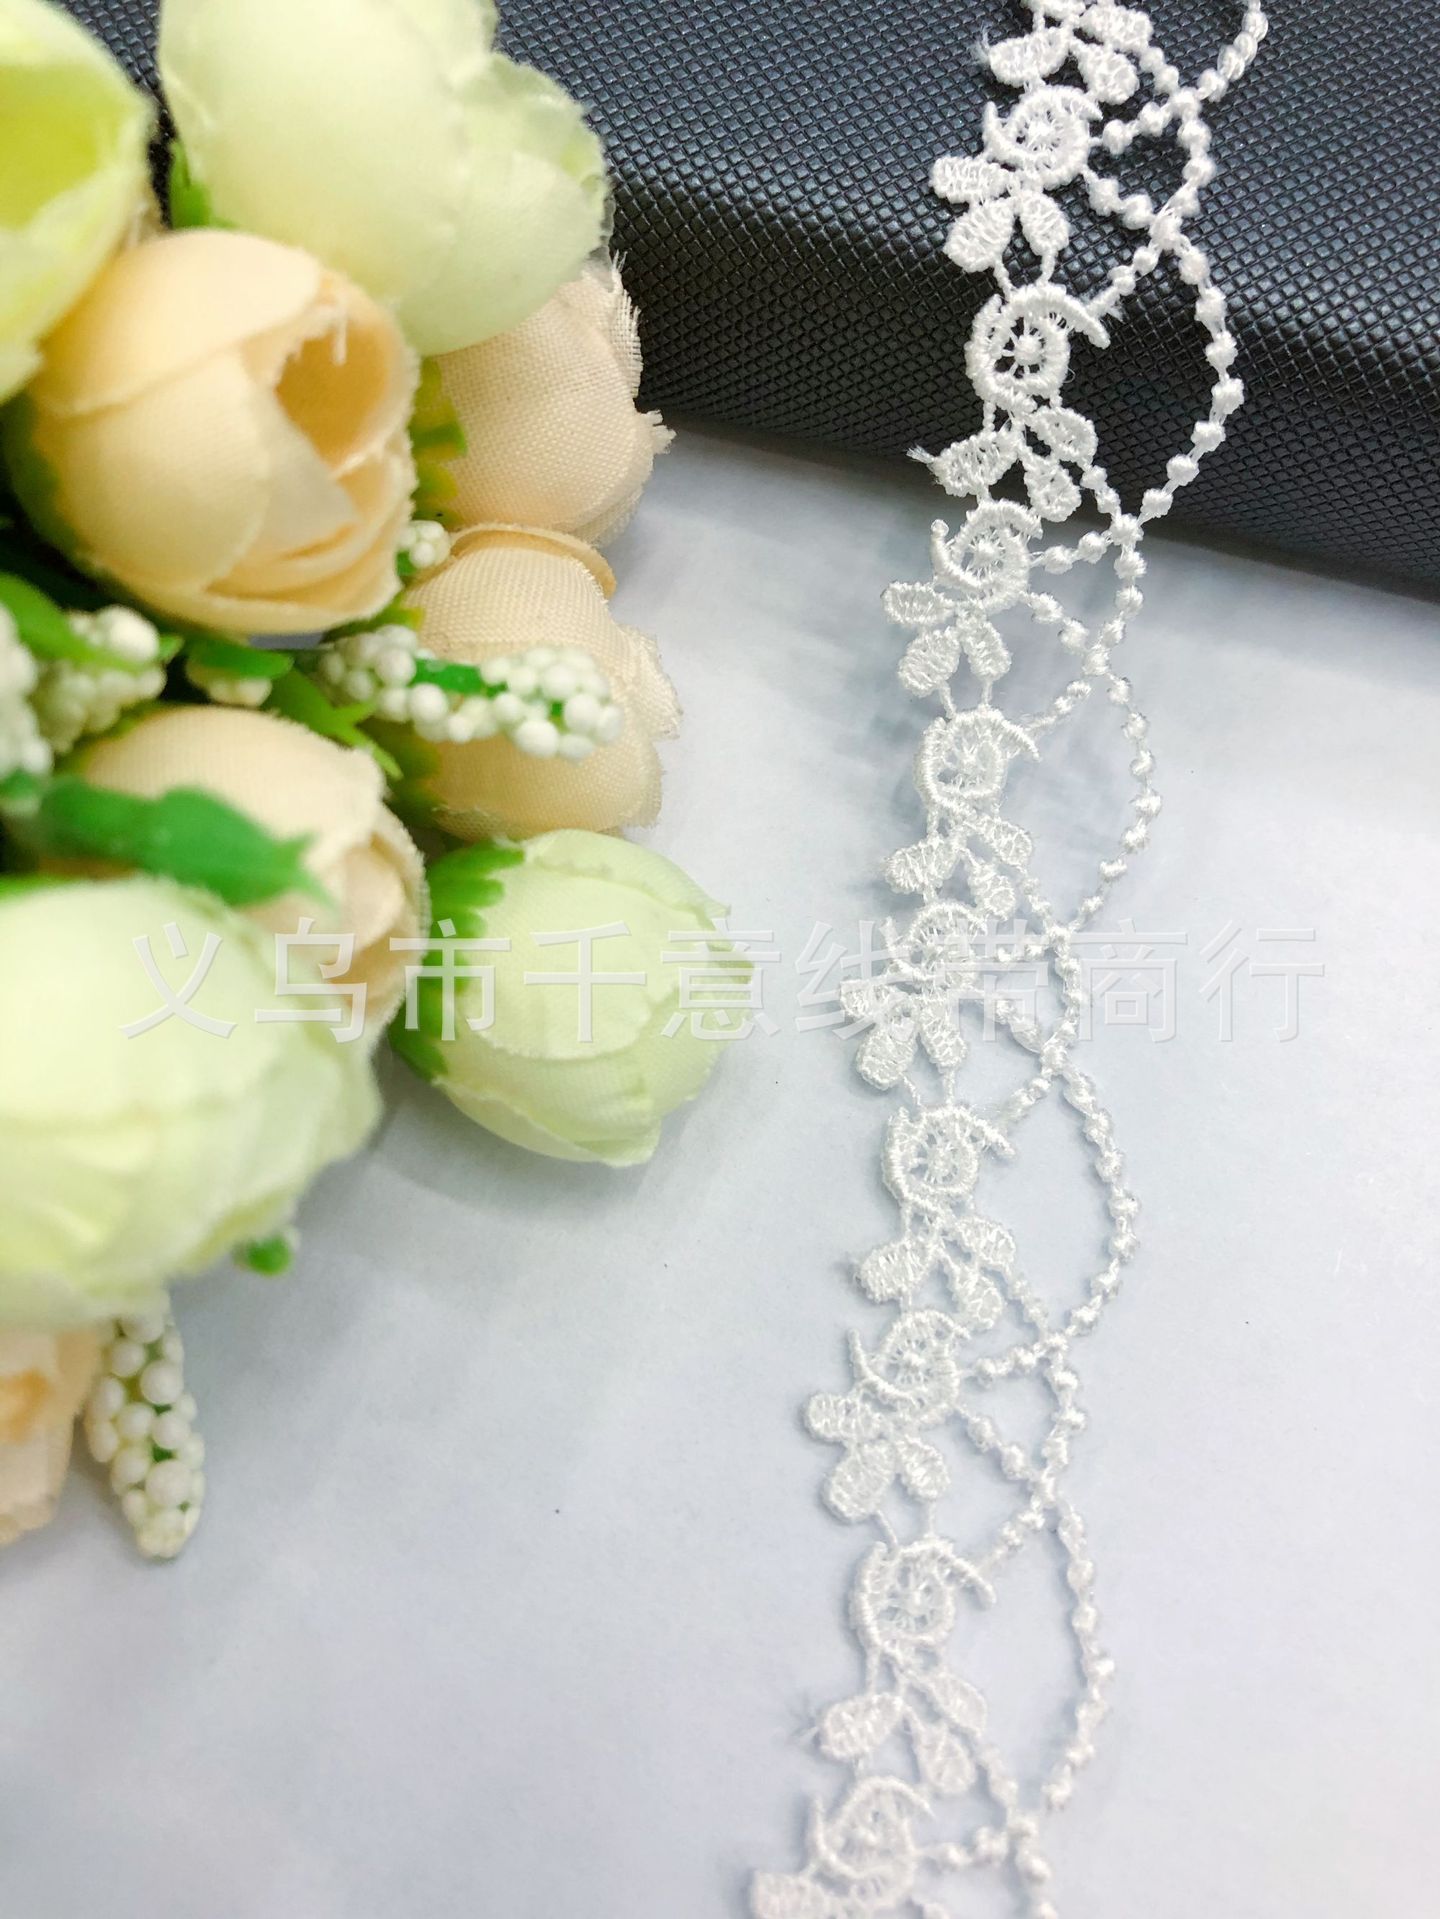 In Stock Water Soluble Polyester Lace DIY Handmade Necklace Bracelet Wedding Dress Accessories